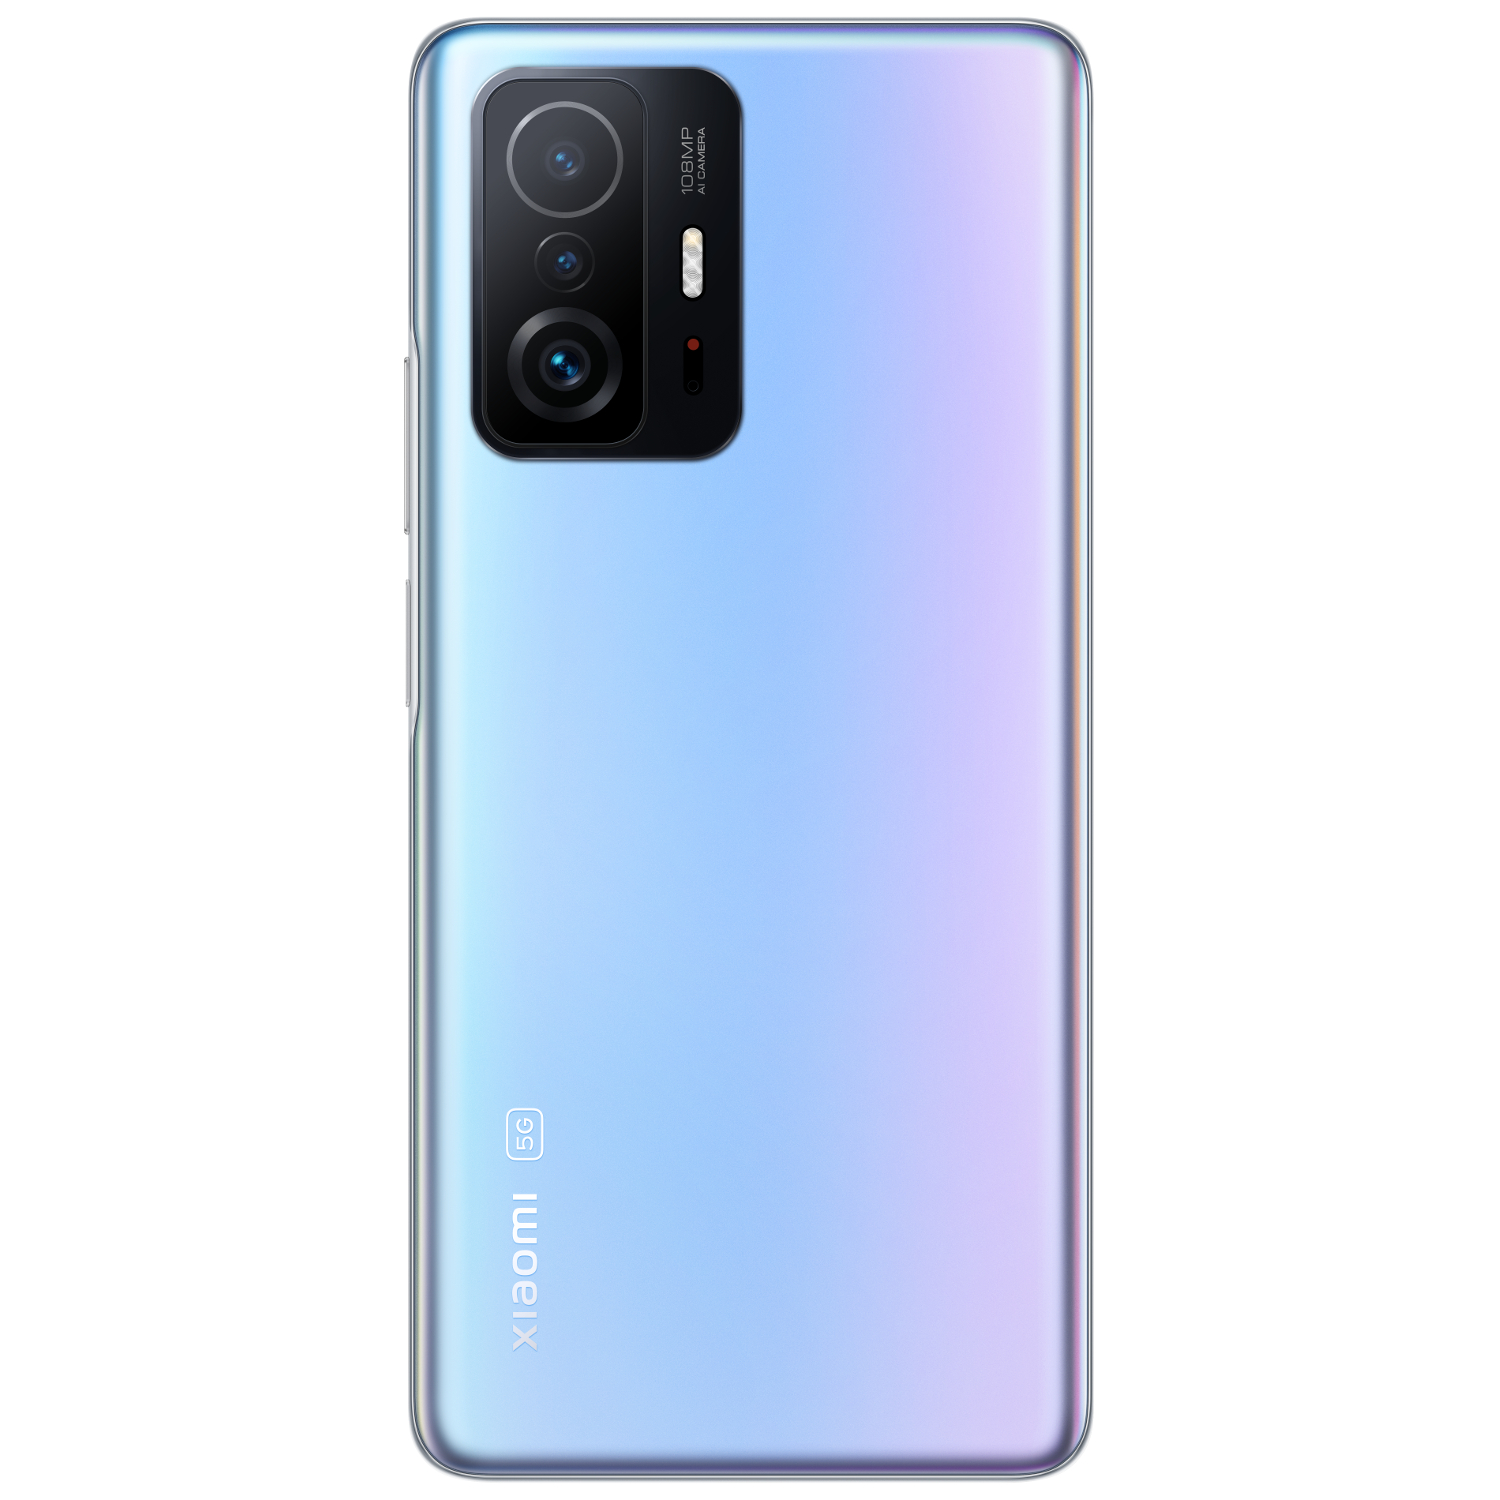 Find Xiaomi 11T Pro Global Version 120W Fast Charge 108MP Triple Camera 8GB 128GB Snapdragon 888 6.67 inch 120Hz AMOLED NFC Octa Core 5G Smartphone for Sale on Gipsybee.com with cryptocurrencies